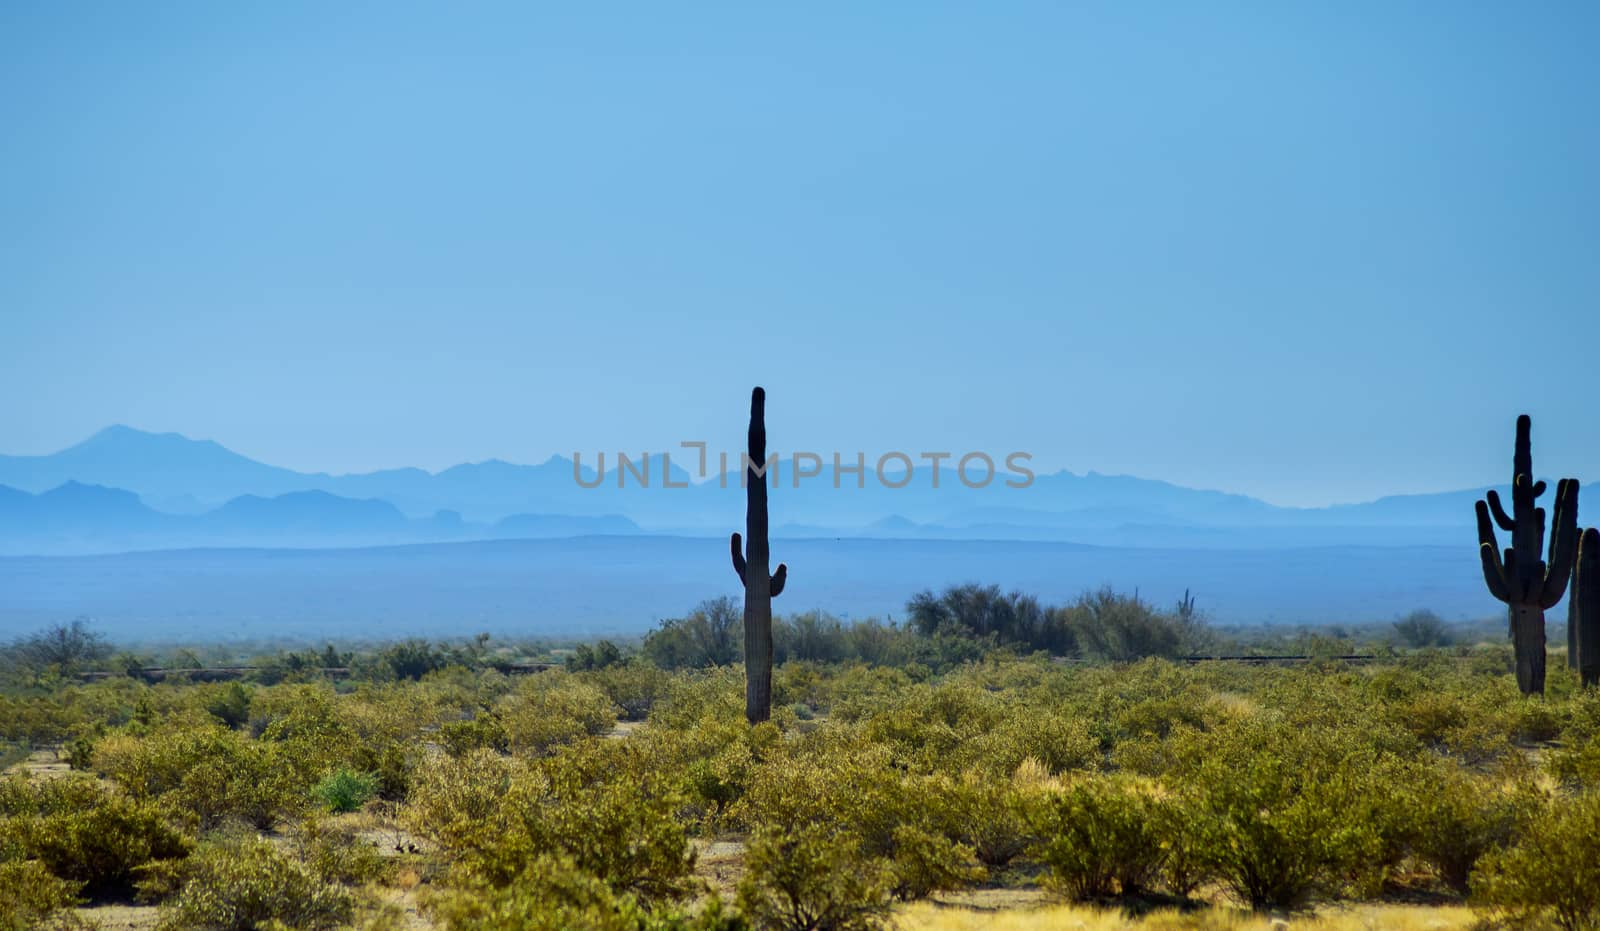 Silhouette scenery of Sonora desert, Arizona shines on Saguaro cacti of mountains and twilight sky in the background.